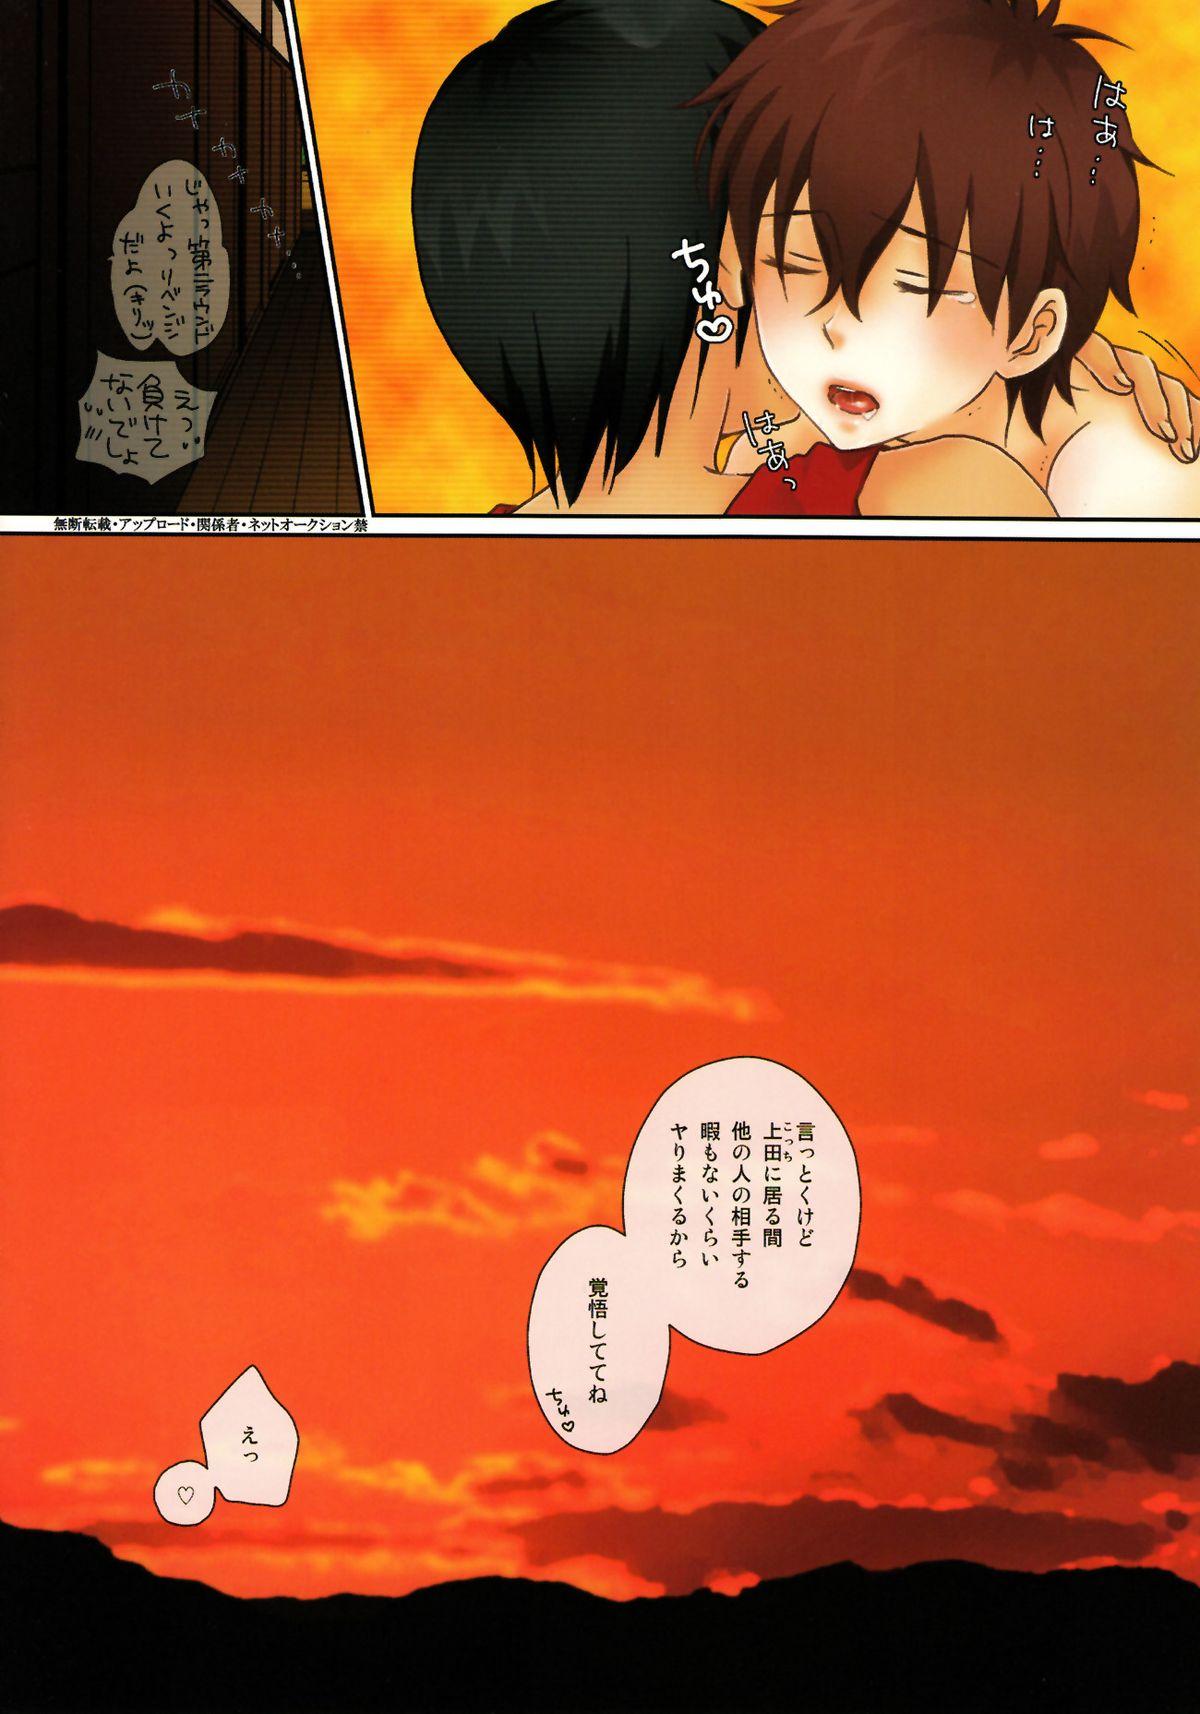 Moaning One Year After - Summer wars Gay Boyporn - Page 8